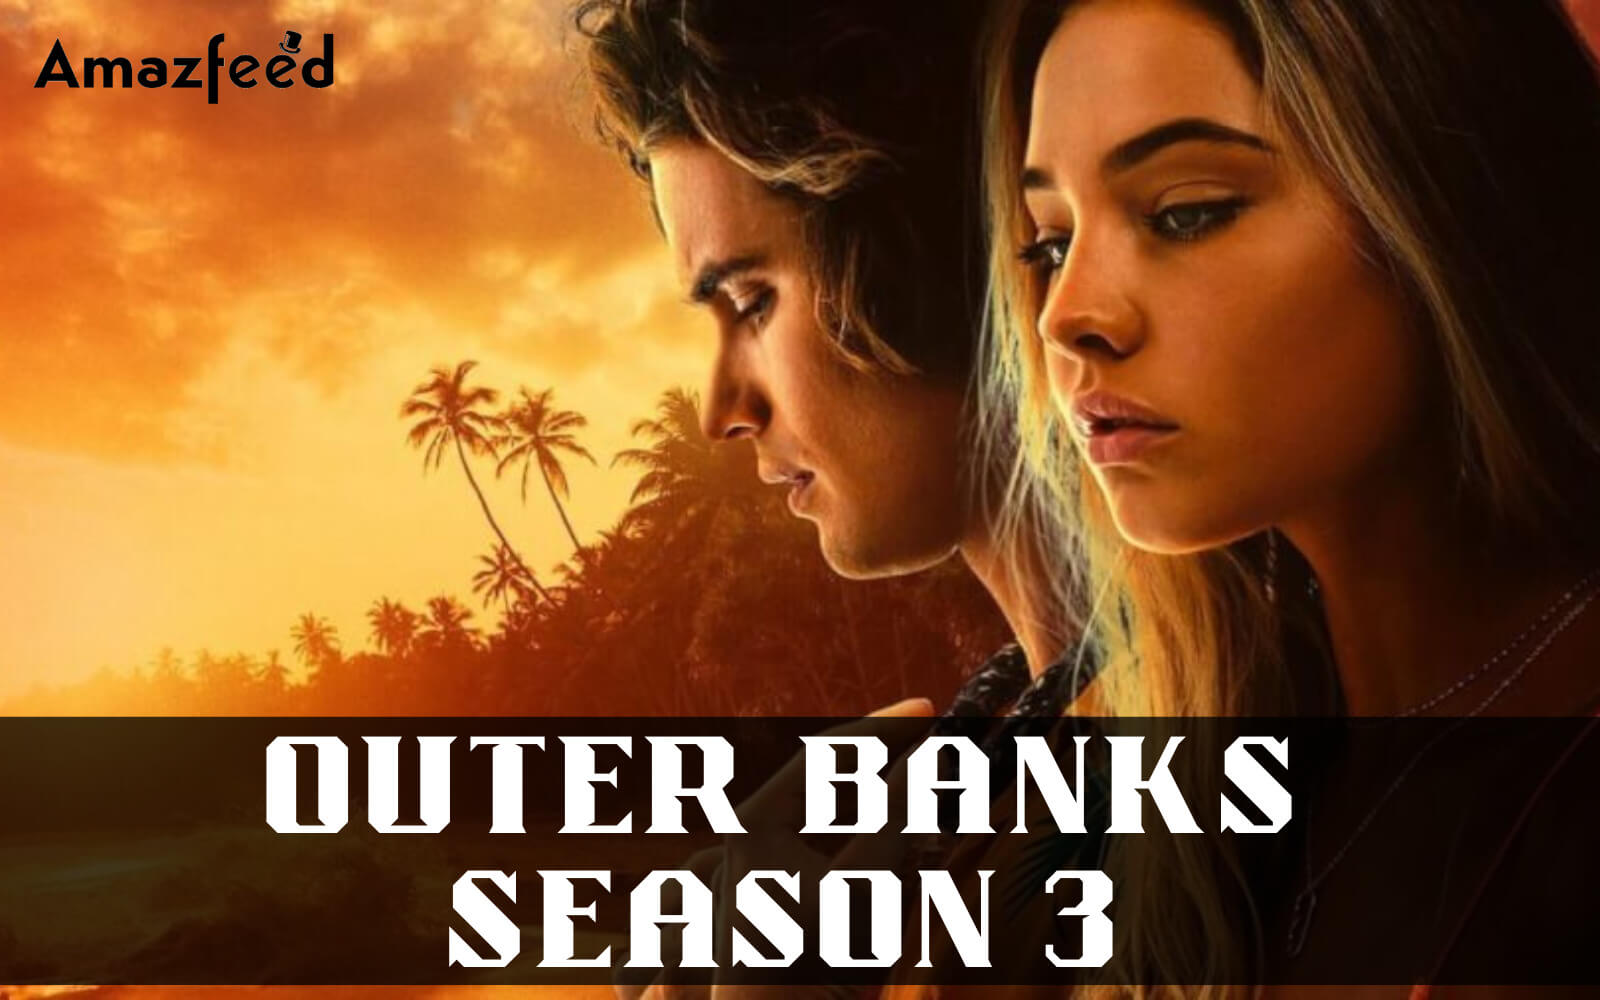 When Is Outer Banks Season 3 Coming Out (Release Date)